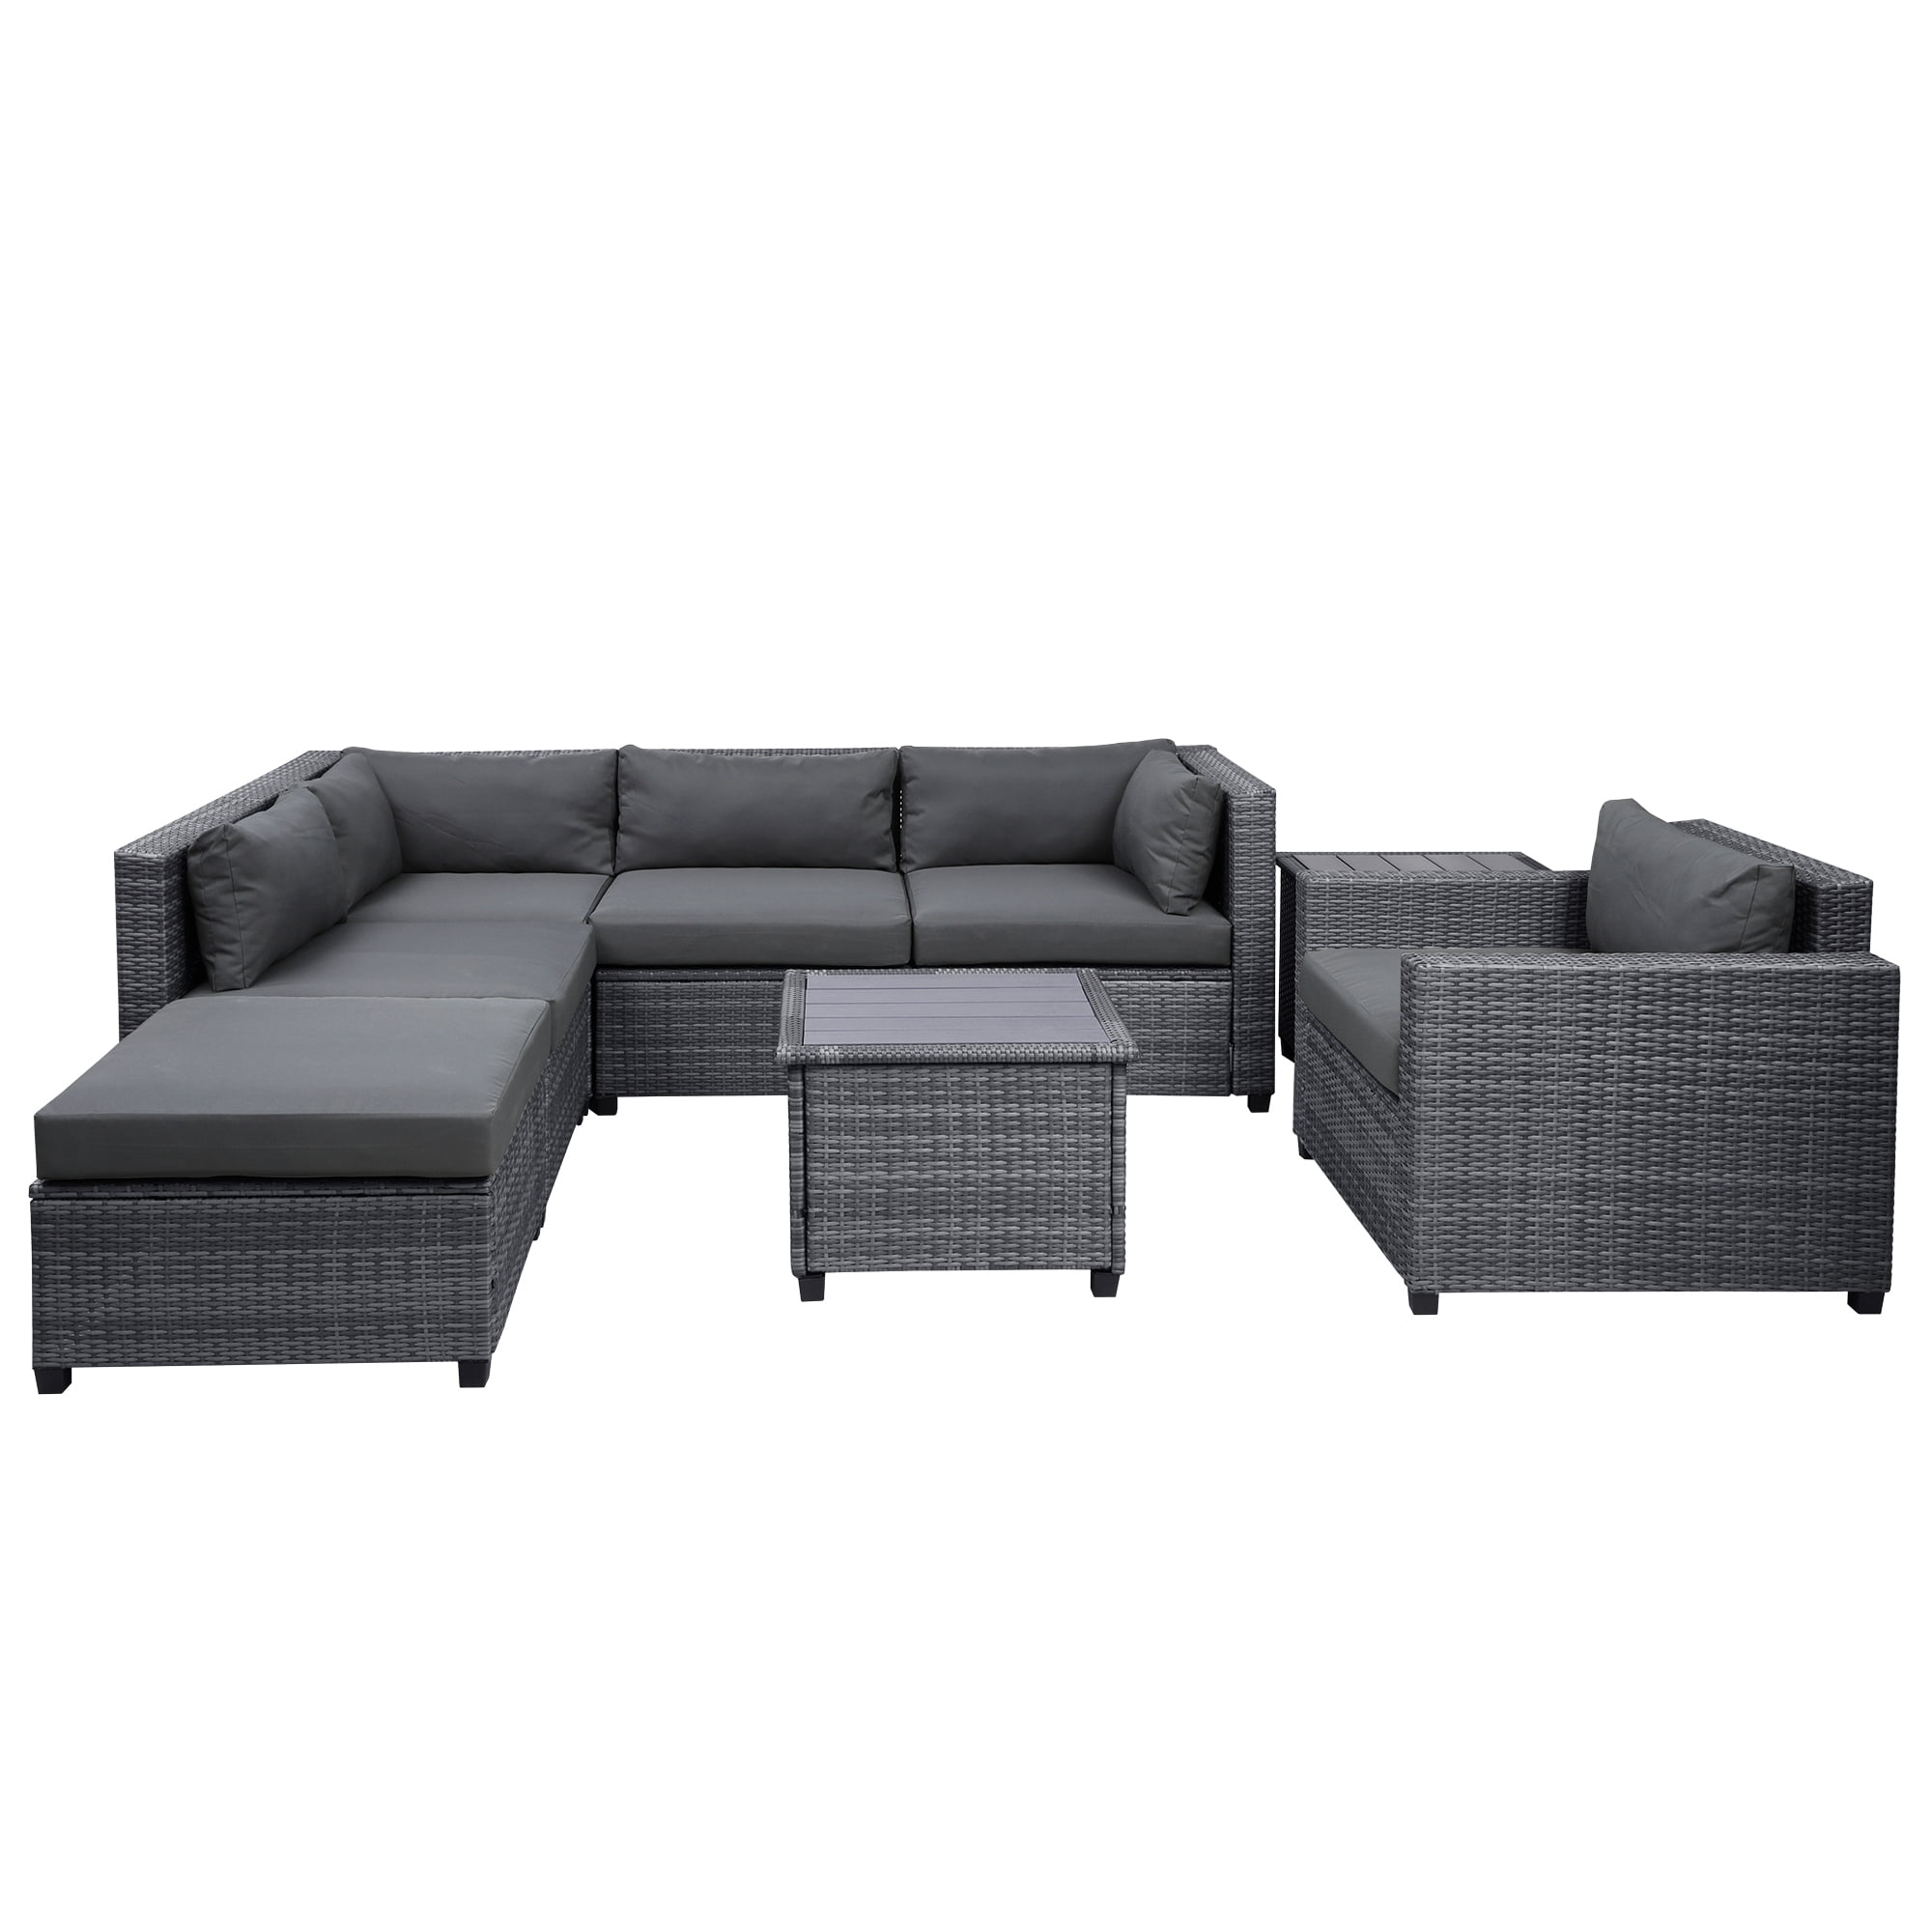 8 Piece Rattan Sectional Sofa Set, Outdoor Conversation Set, All-Weather  Wicker Sectional Seating Group with Cushions & 2 Coffee Tables, Morden Furniture  Couch Set for Patio Deck Garden Pool